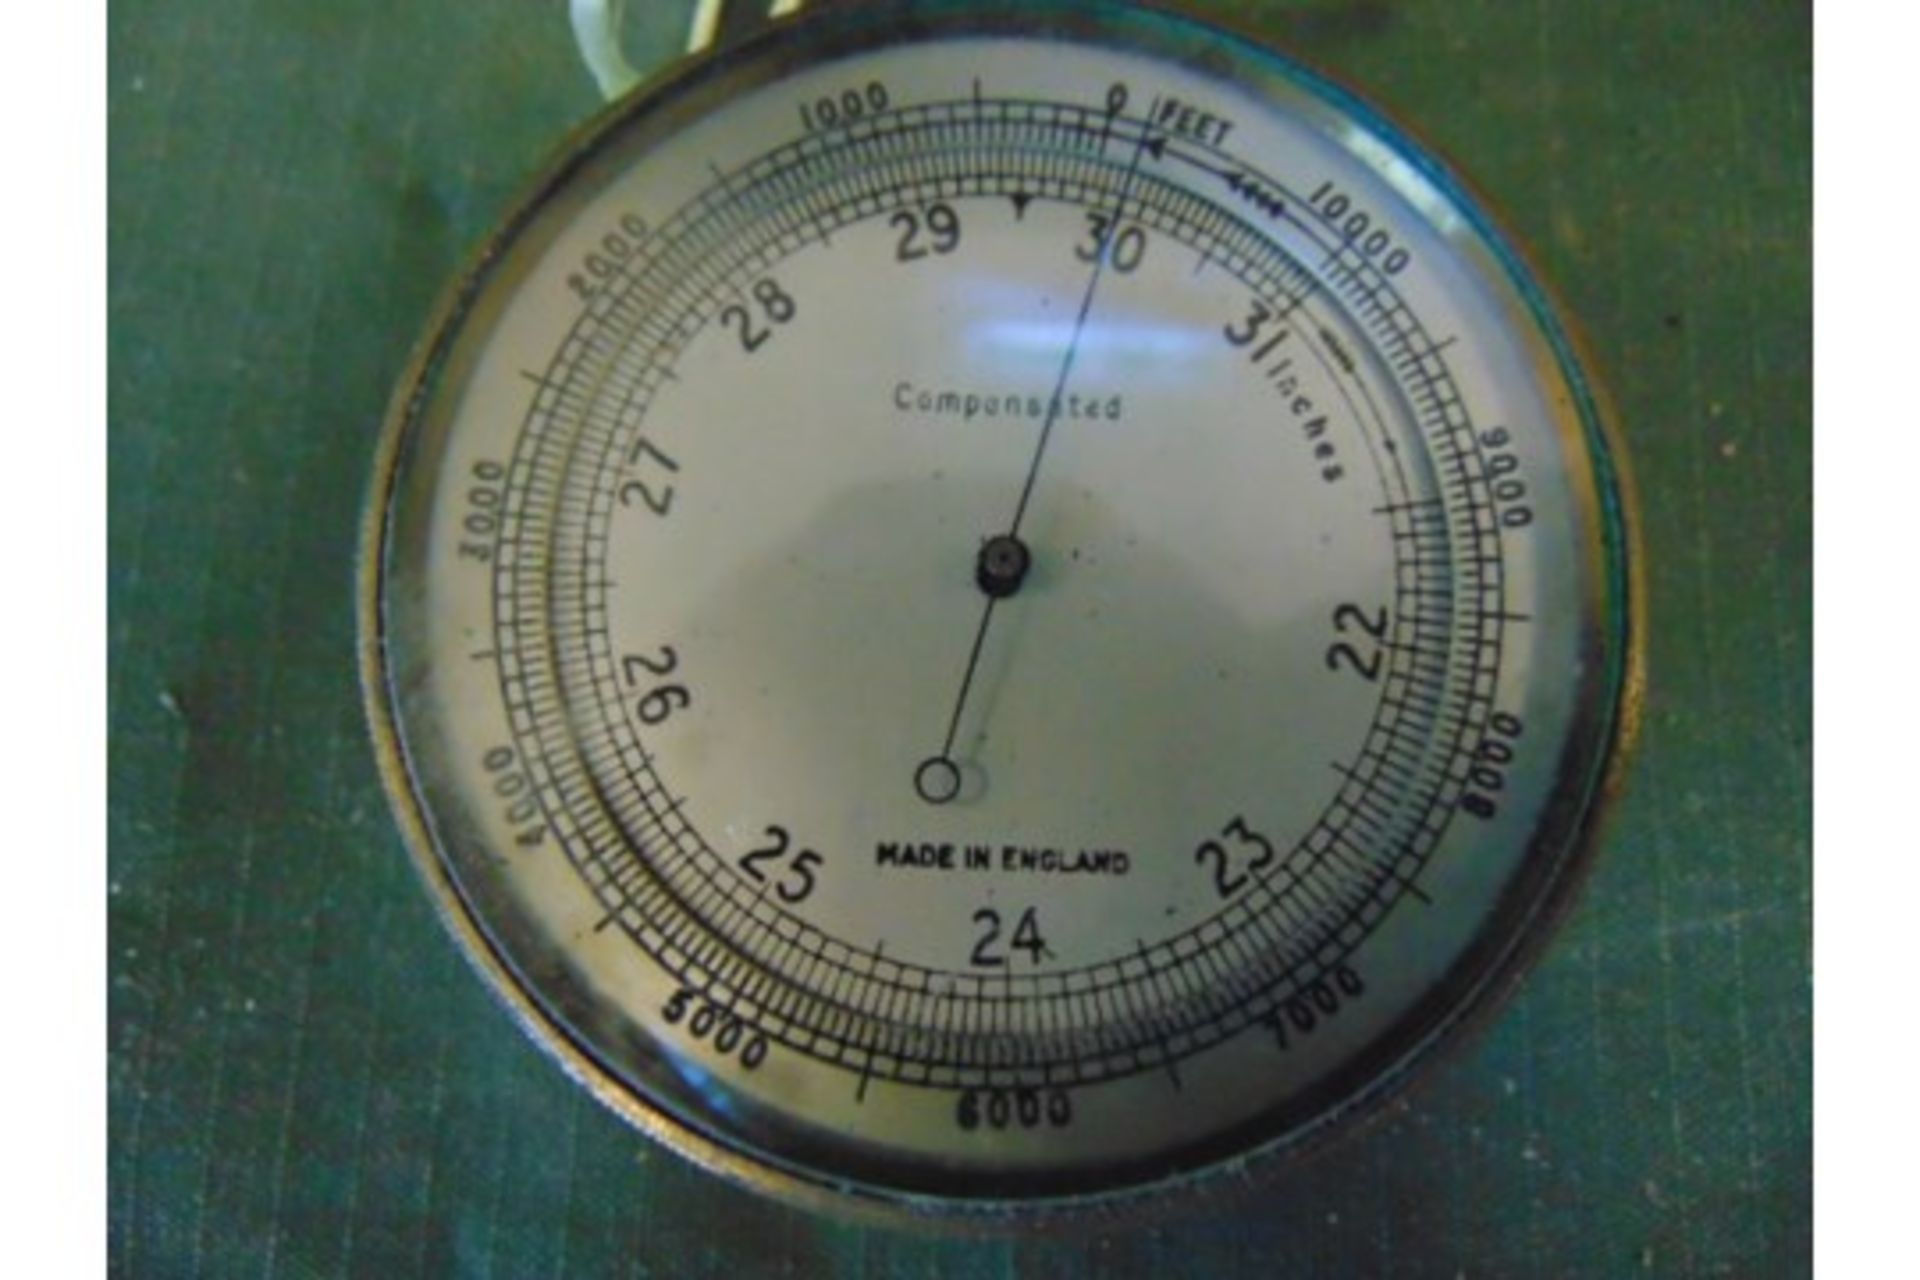 Military Issue Aneroid Barometer graduated in feet & millibars - Image 2 of 3